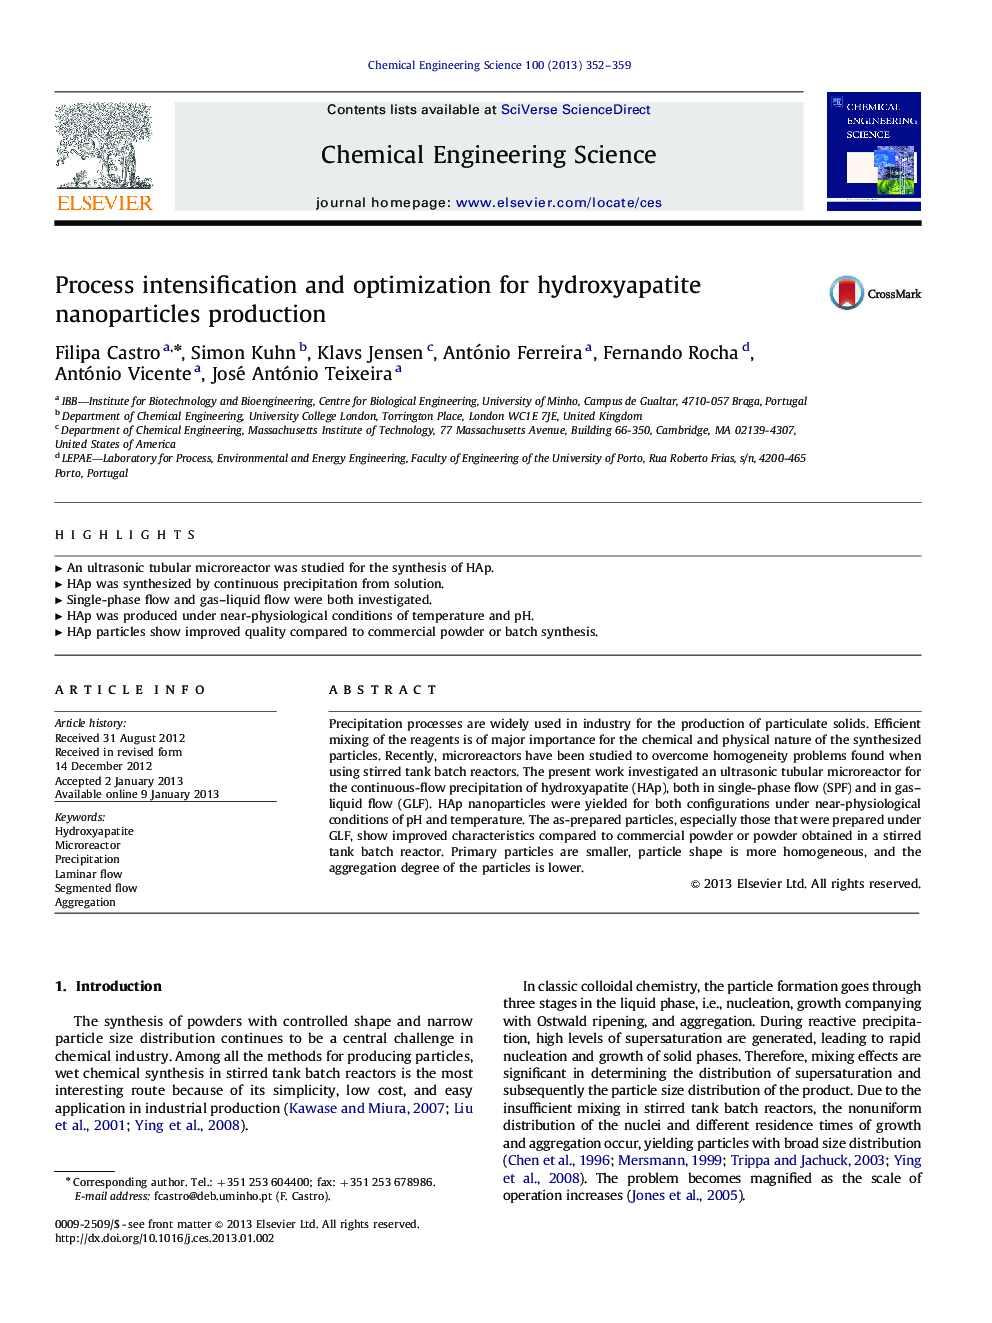 Process intensification and optimization for hydroxyapatite nanoparticles production